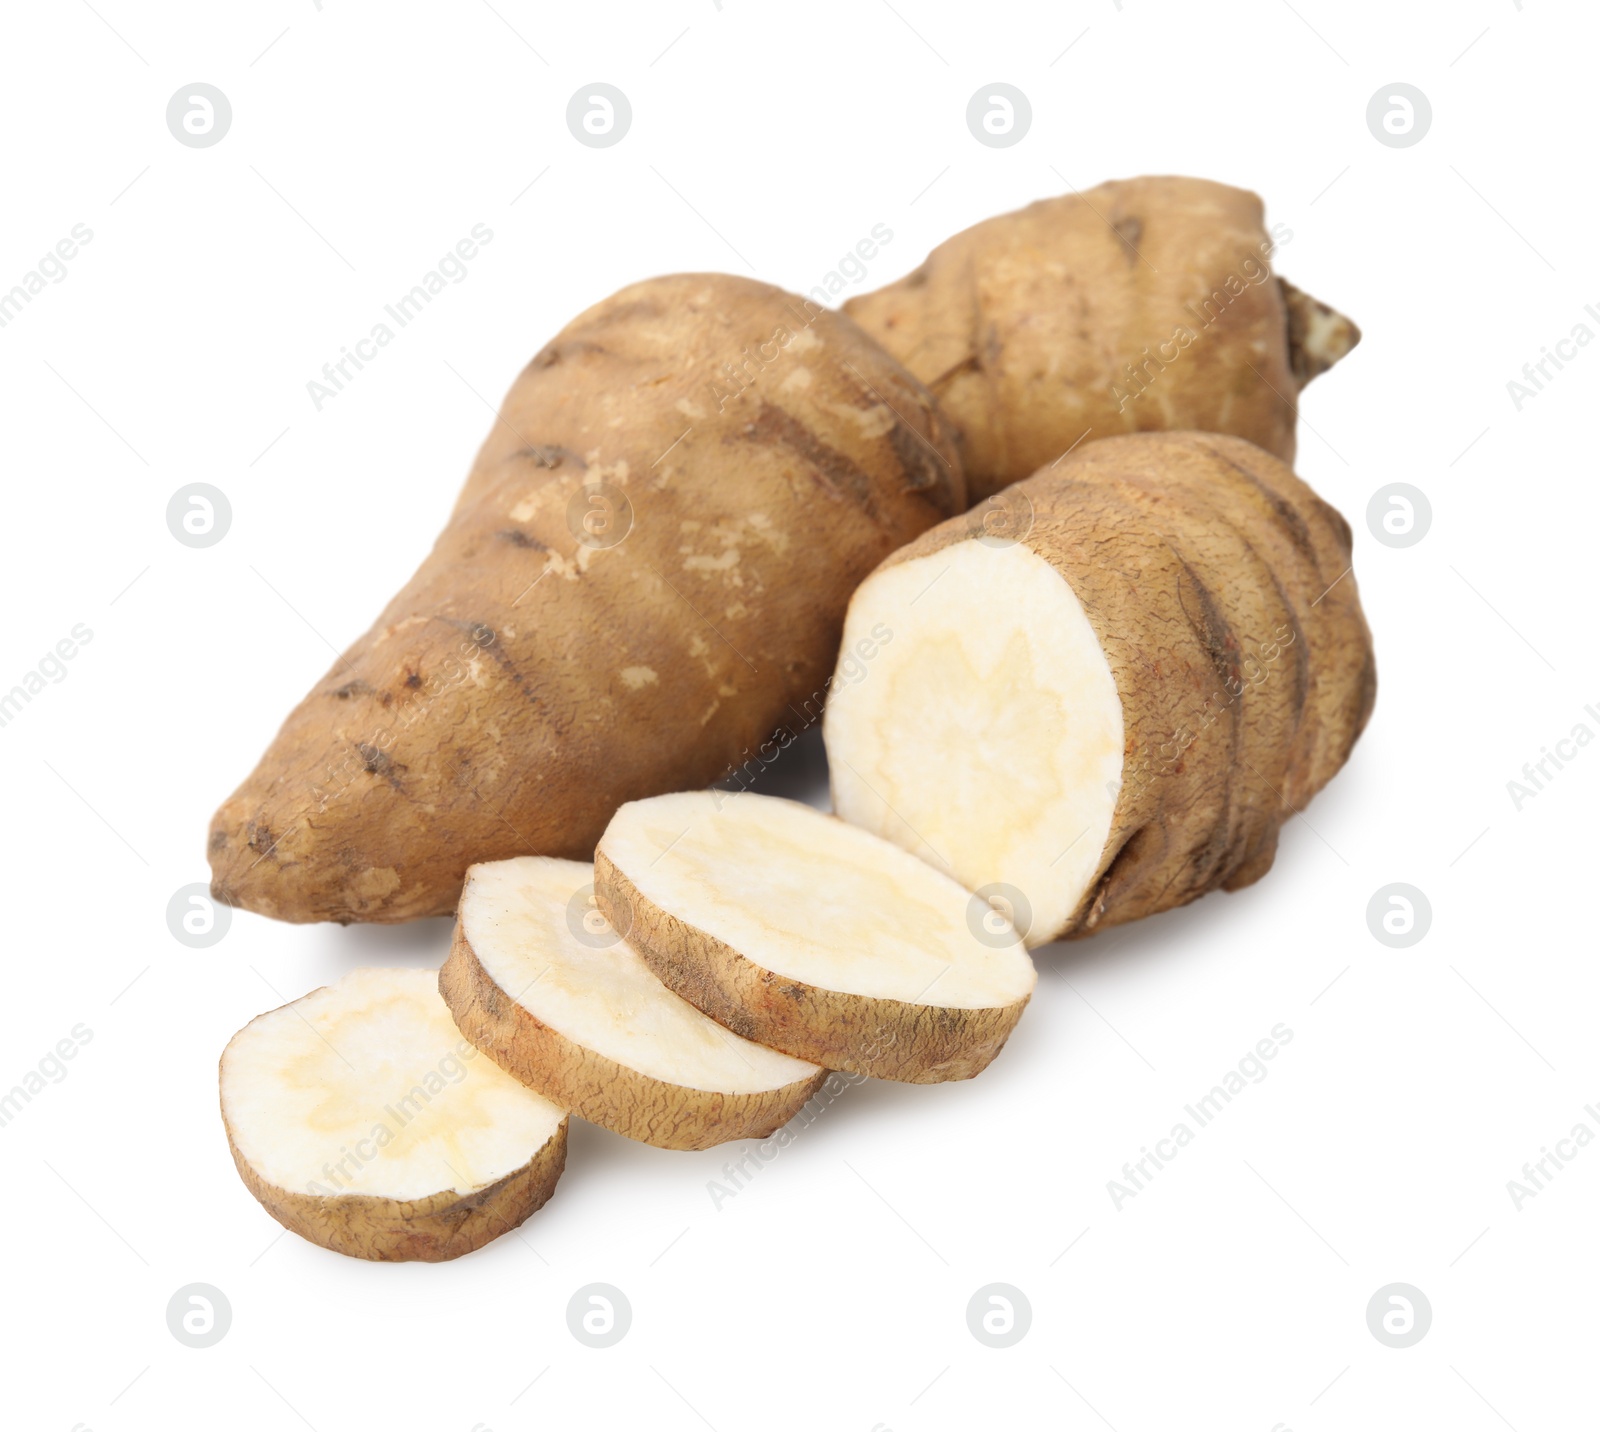 Photo of Whole and cut turnip rooted chervil tubers isolated on white